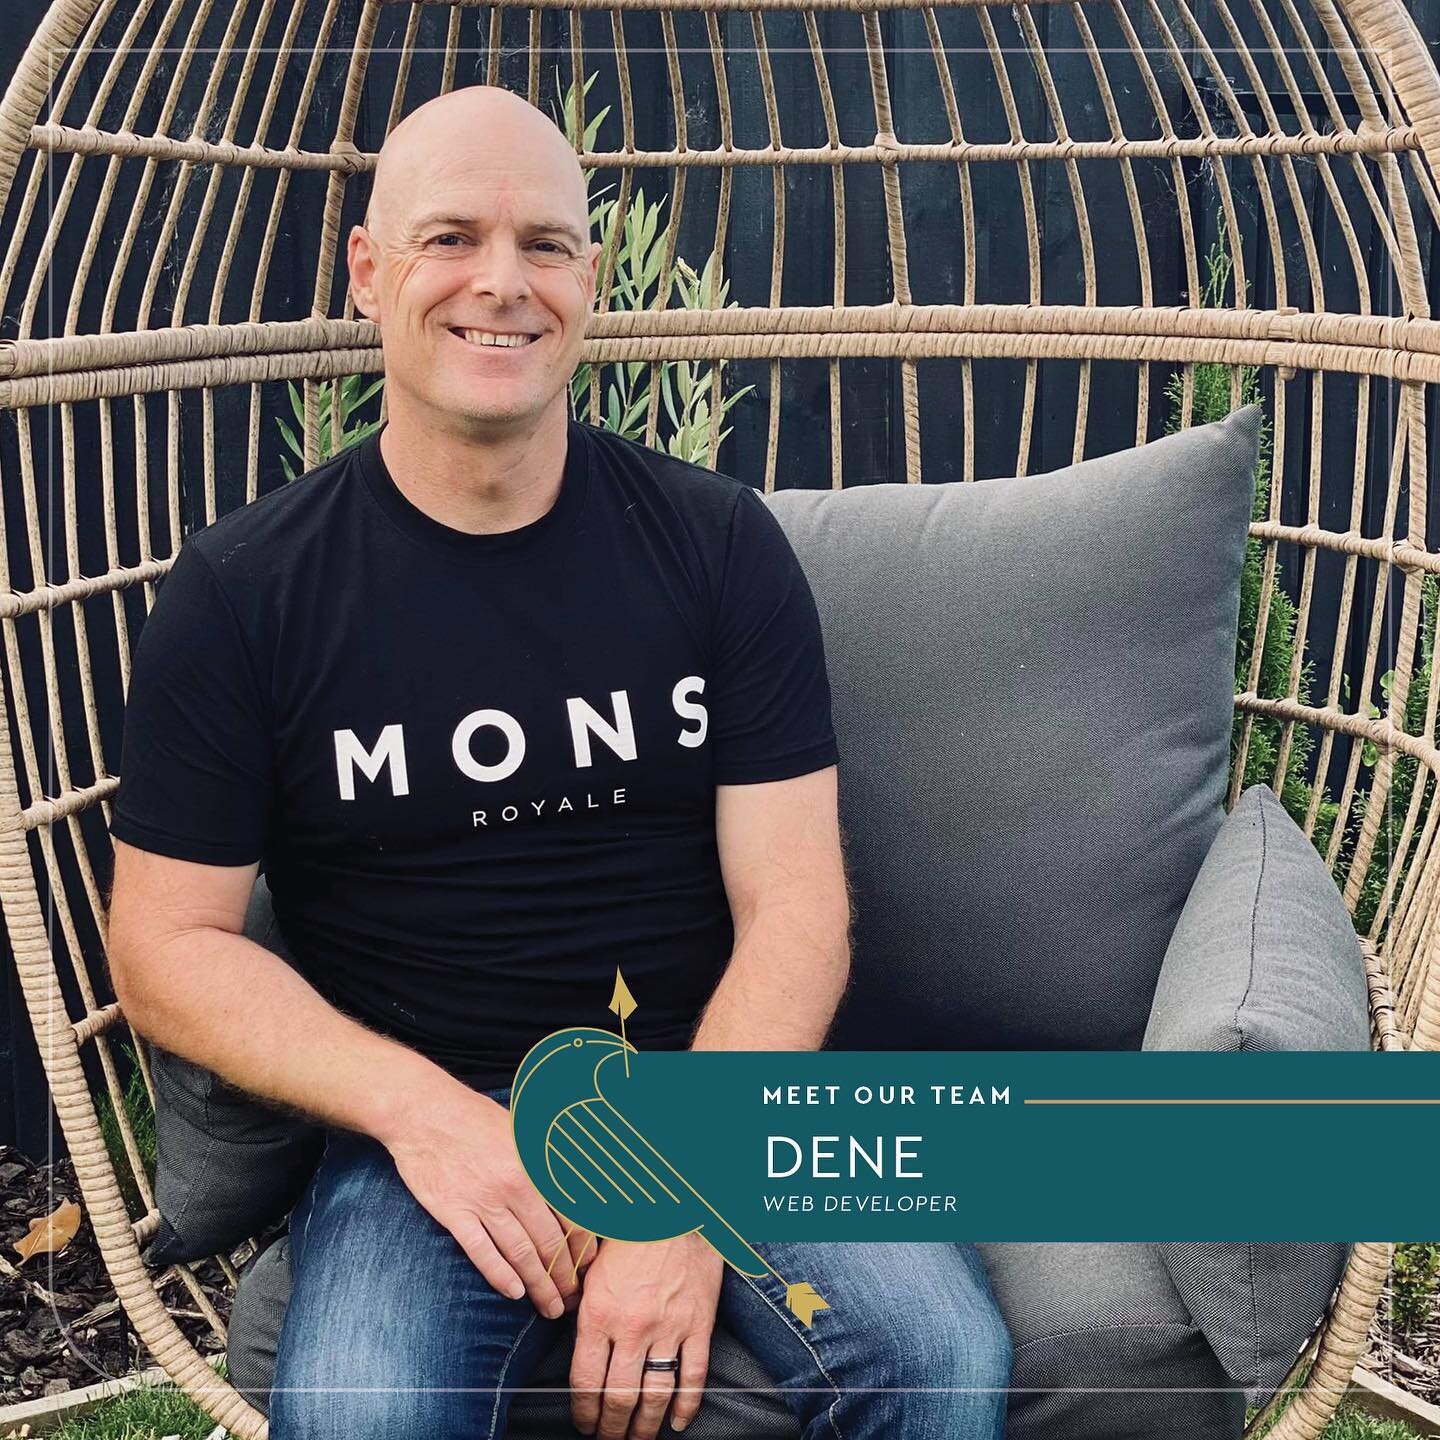 Dene is one of those website developers with an understanding of great design and user experience. (Not all fall into this category!) 

His experience working in design and advertising agencies, with retail and as Help Desk Support for Shopify websit